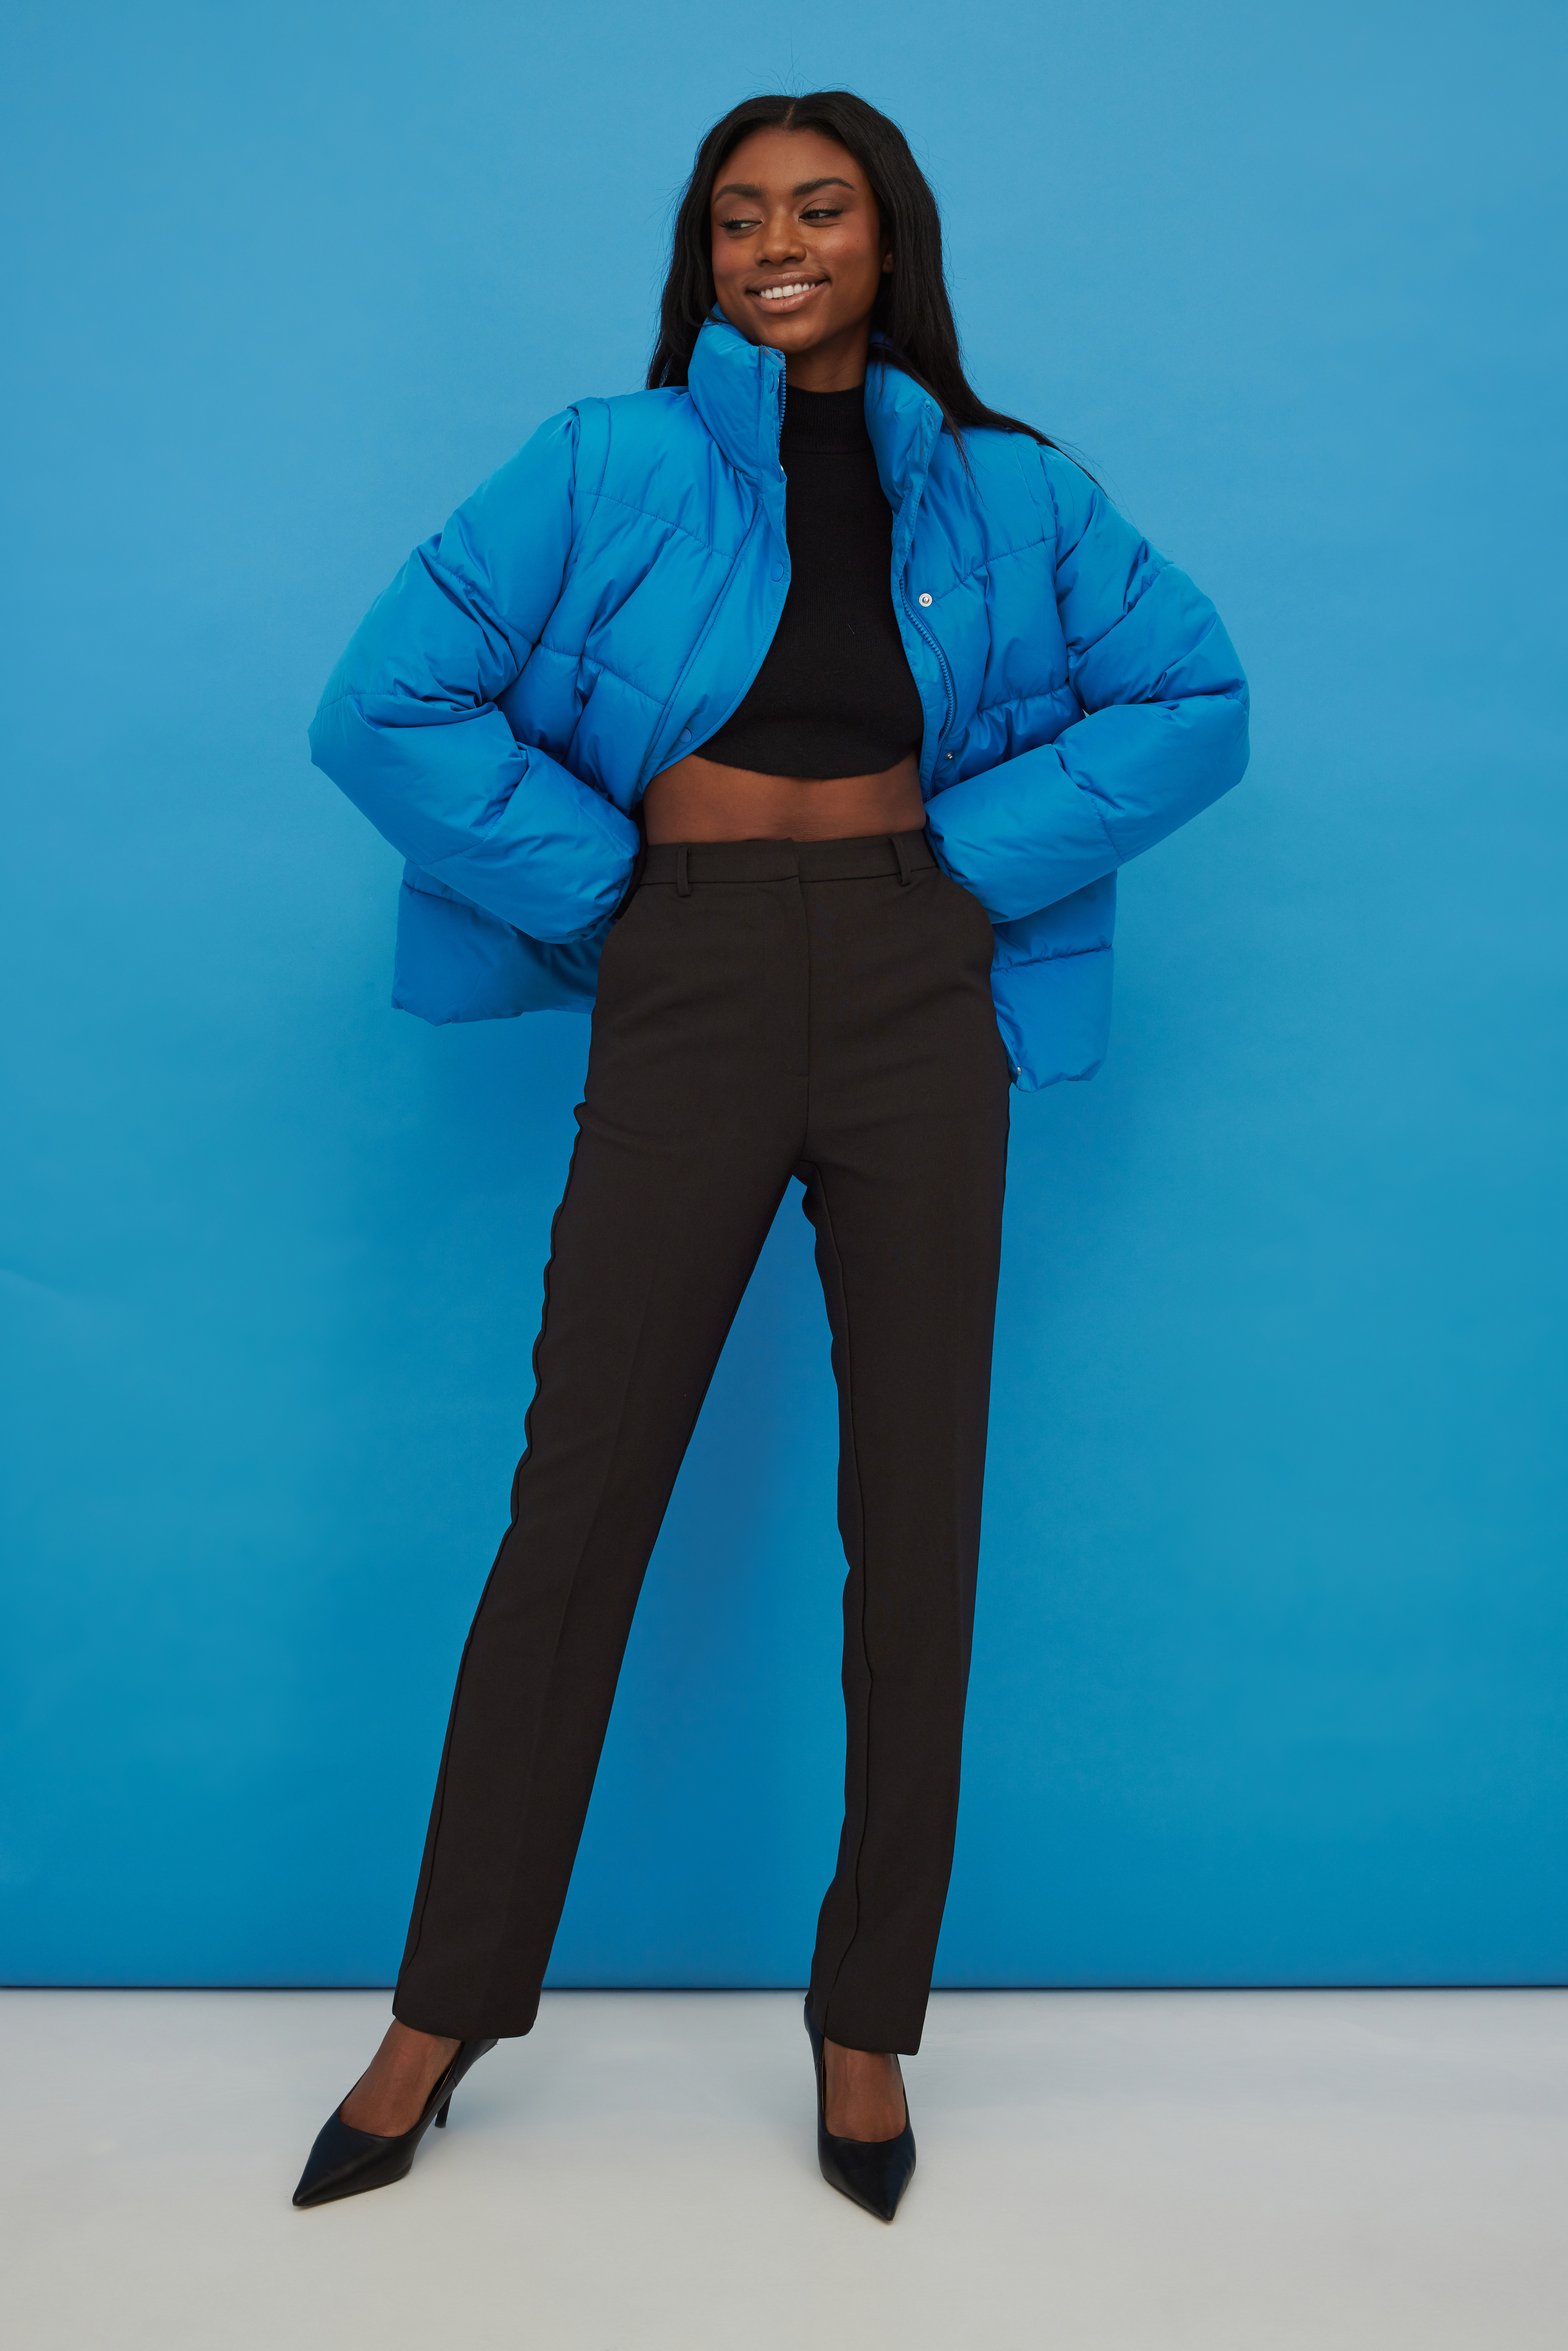 Removable Sleeve Puffer Jacket Outfit.